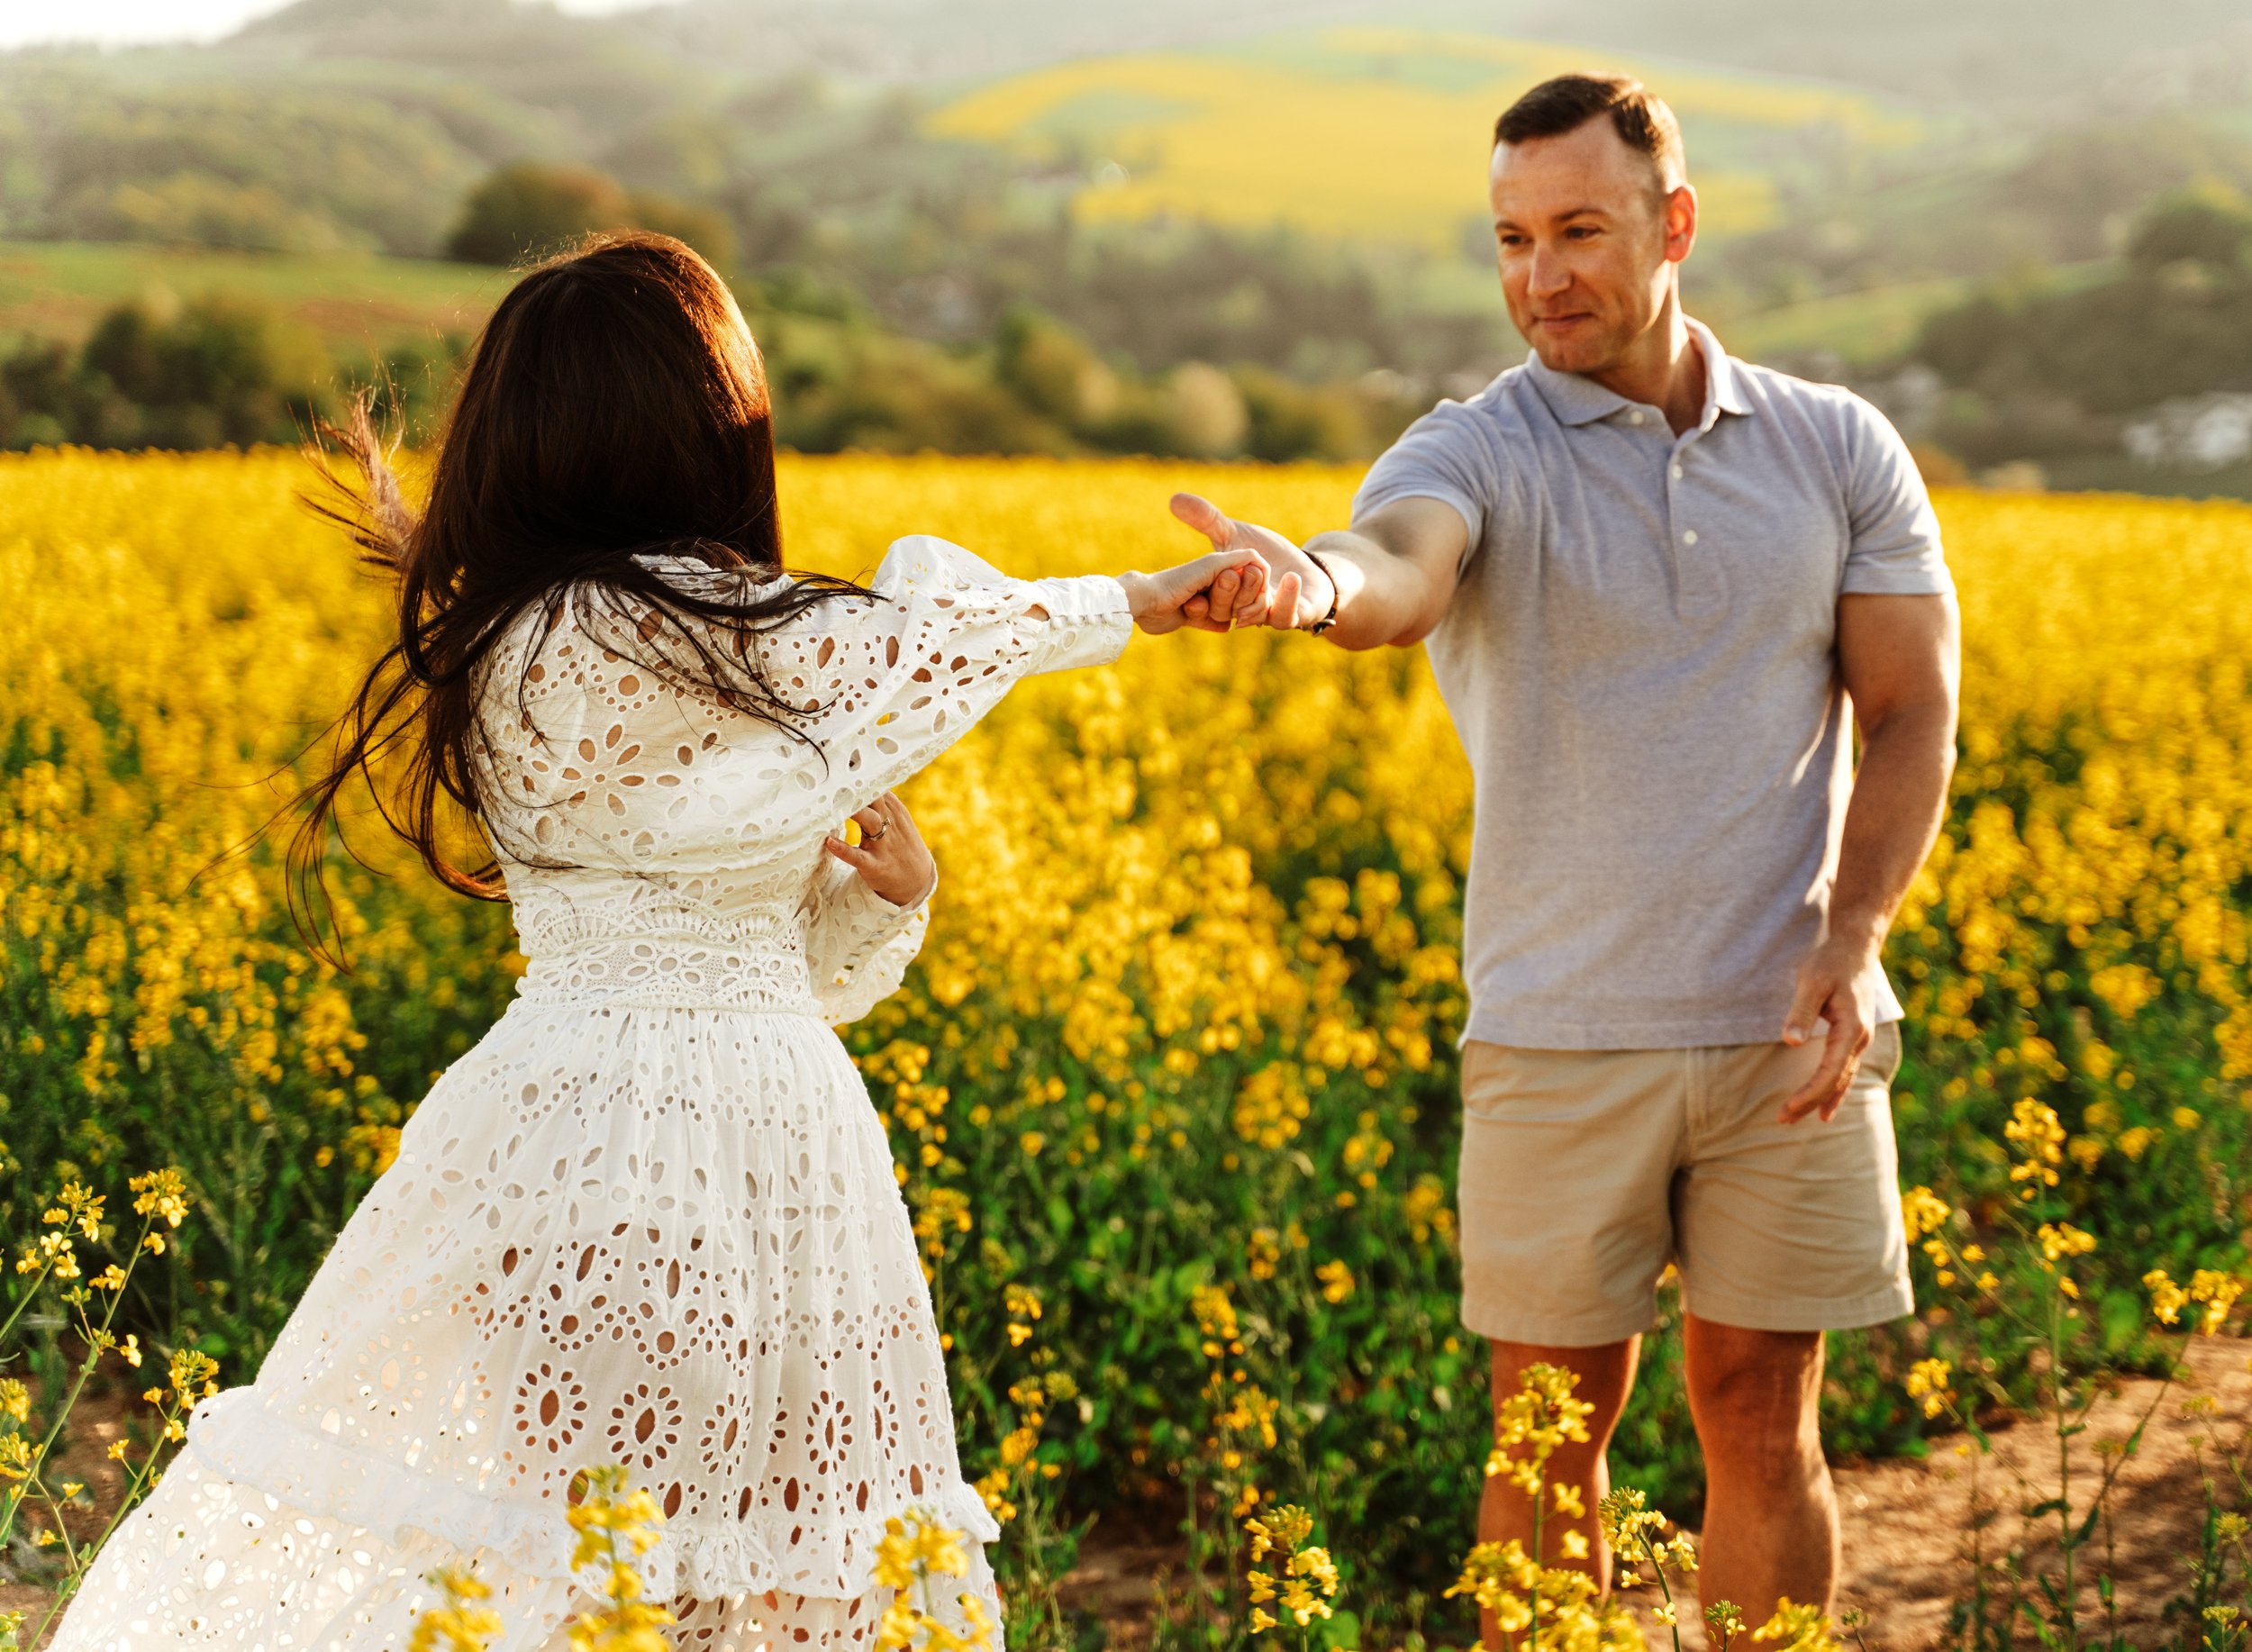 emotive-engagement-photo-session-in-yellow-flower-fields-in-ramstein-germany-by-sarah-havens (4).jpg